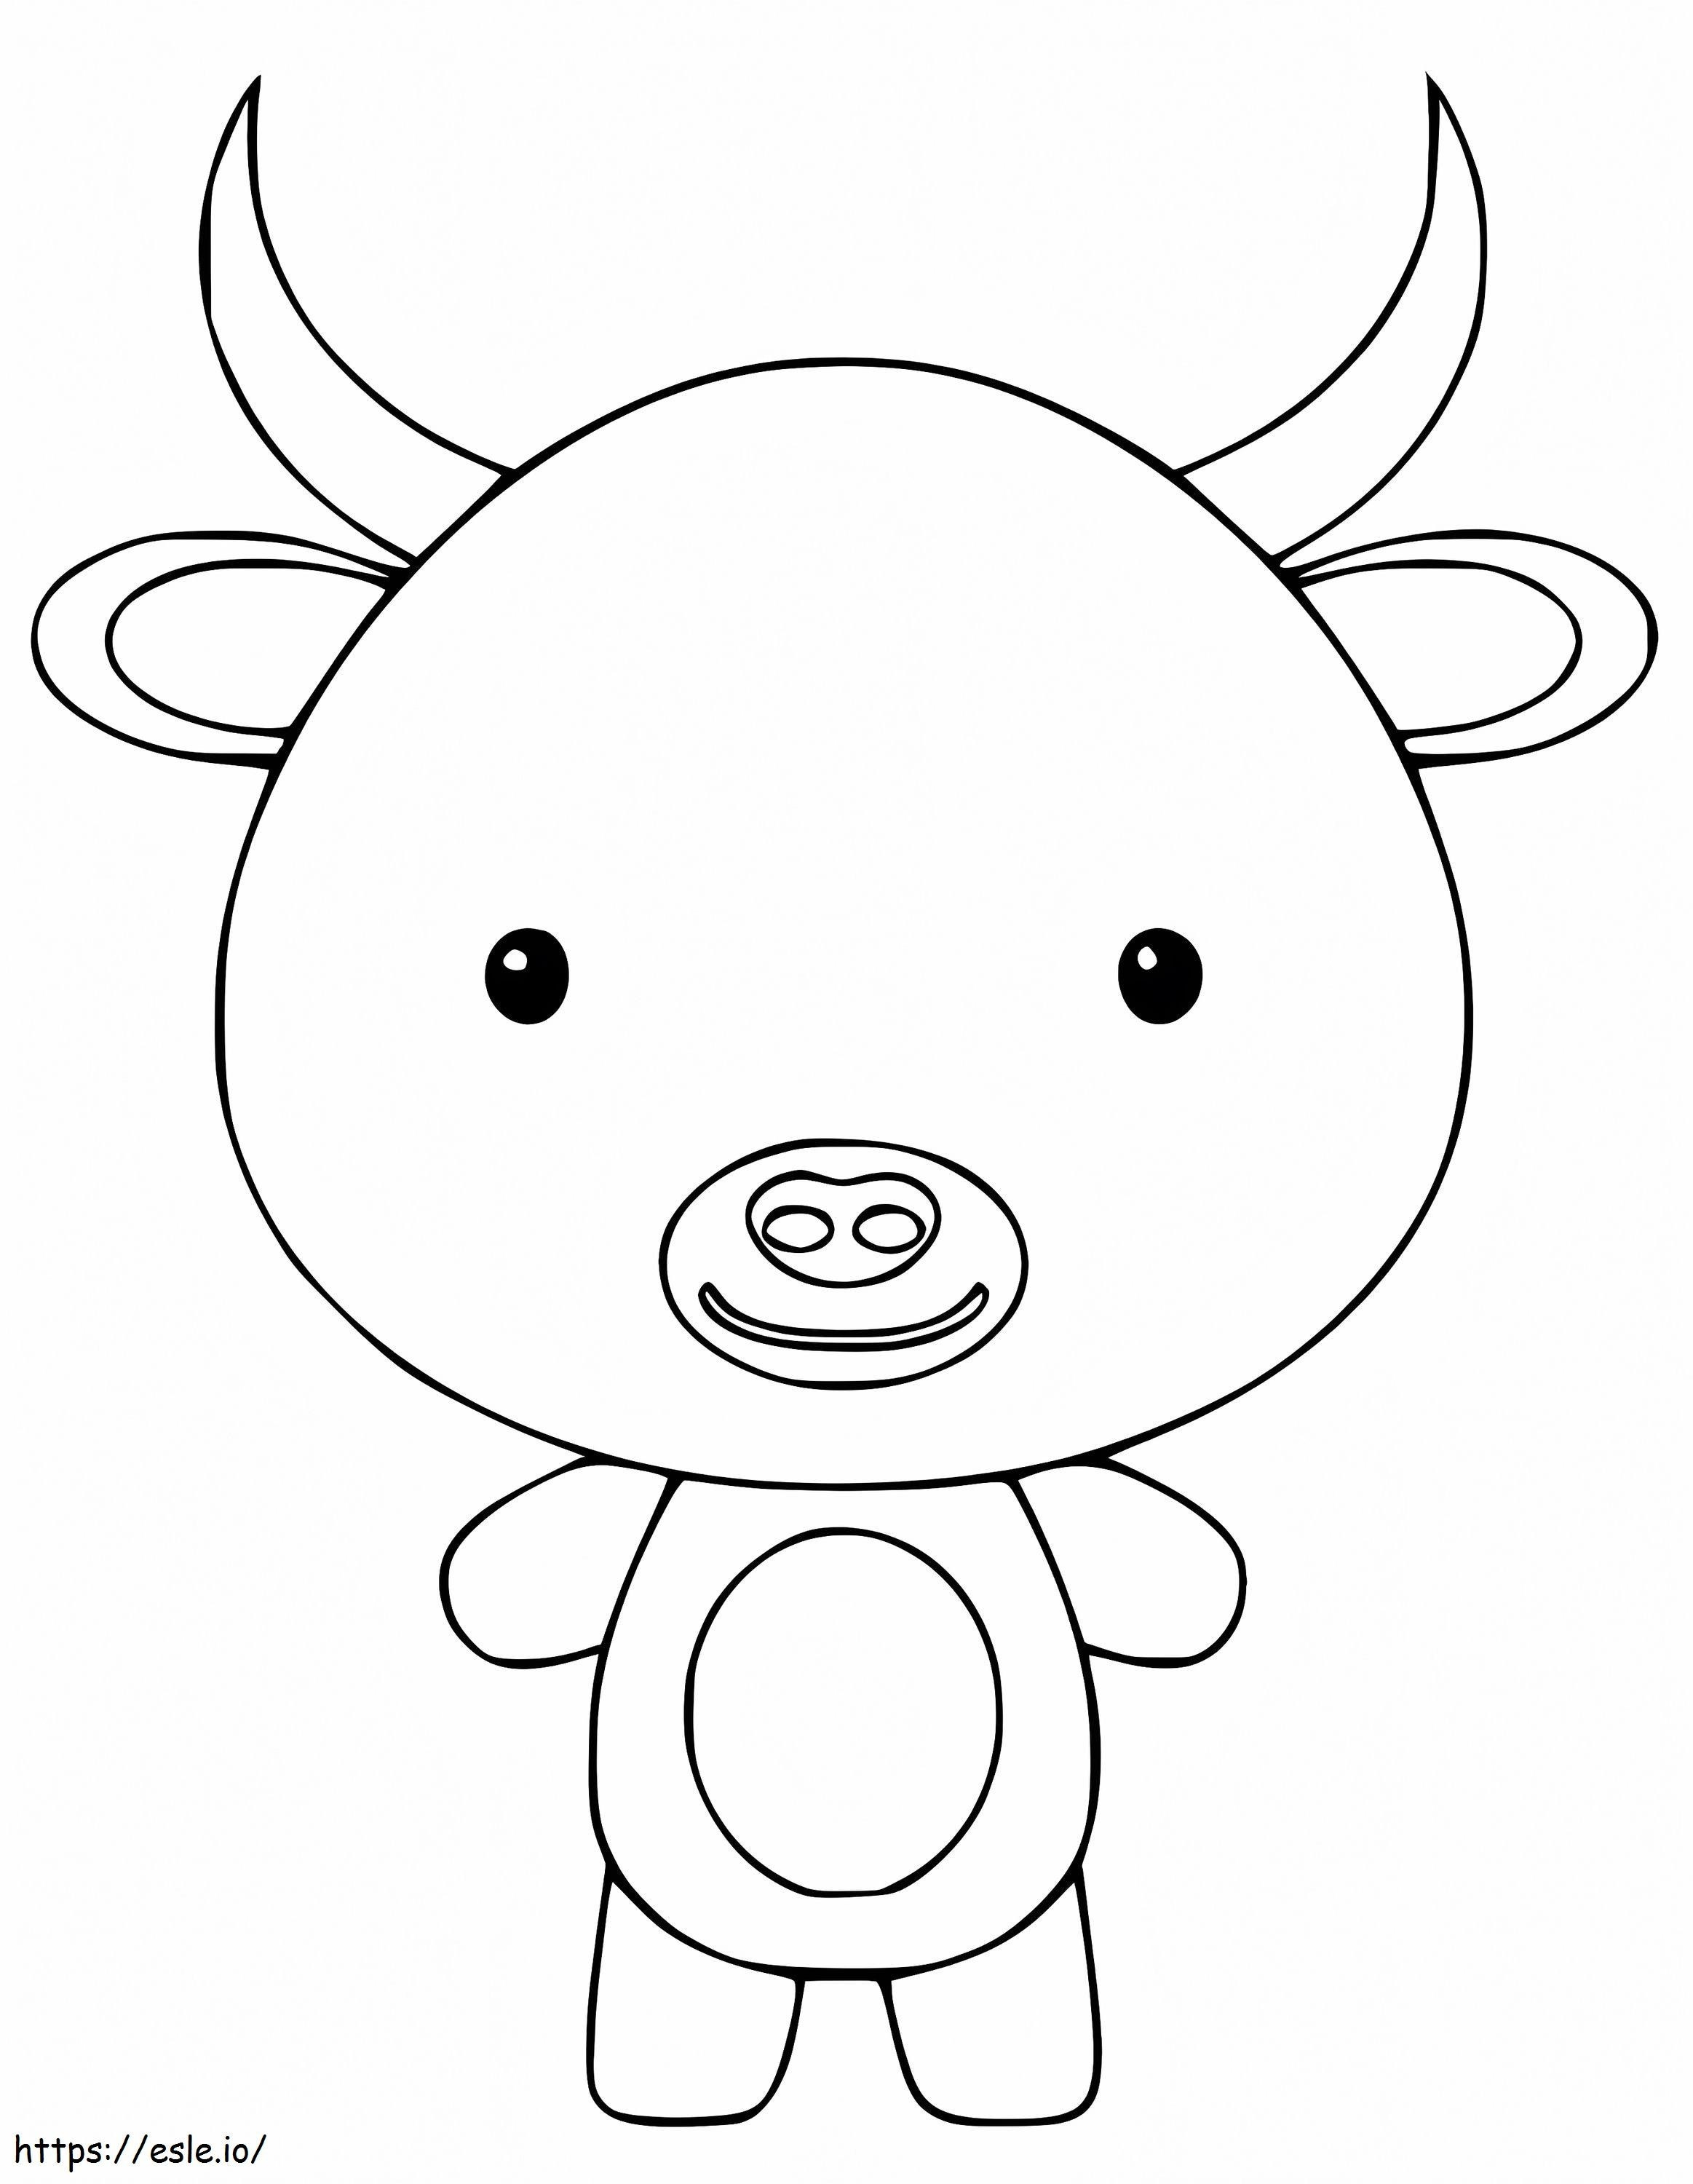 Little Yak coloring page